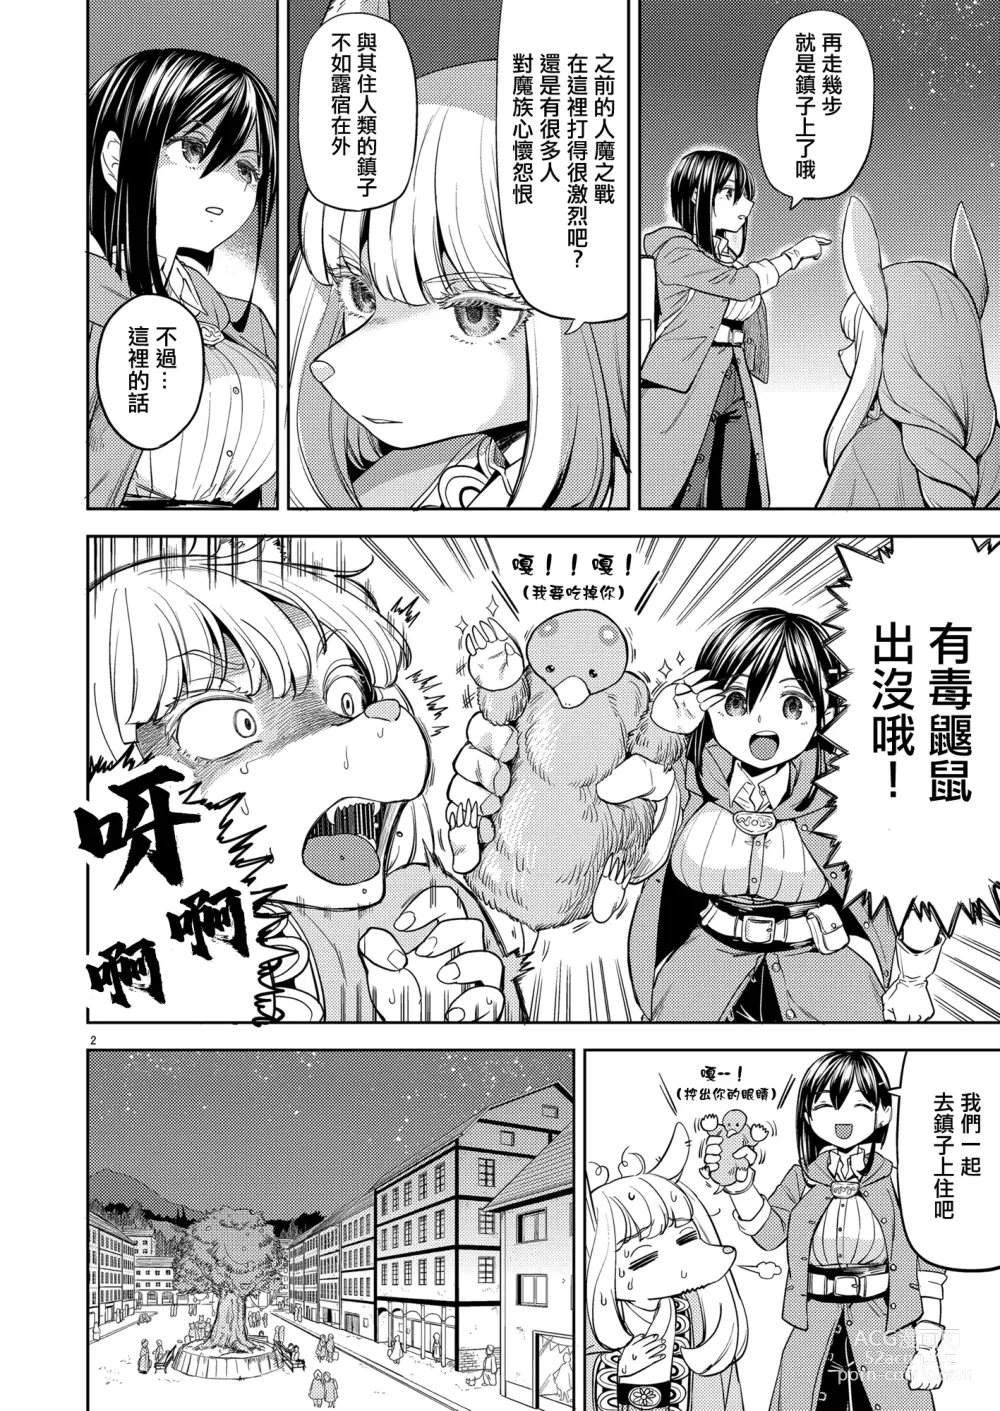 Page 6 of doujinshi 來一場蜜月旅行